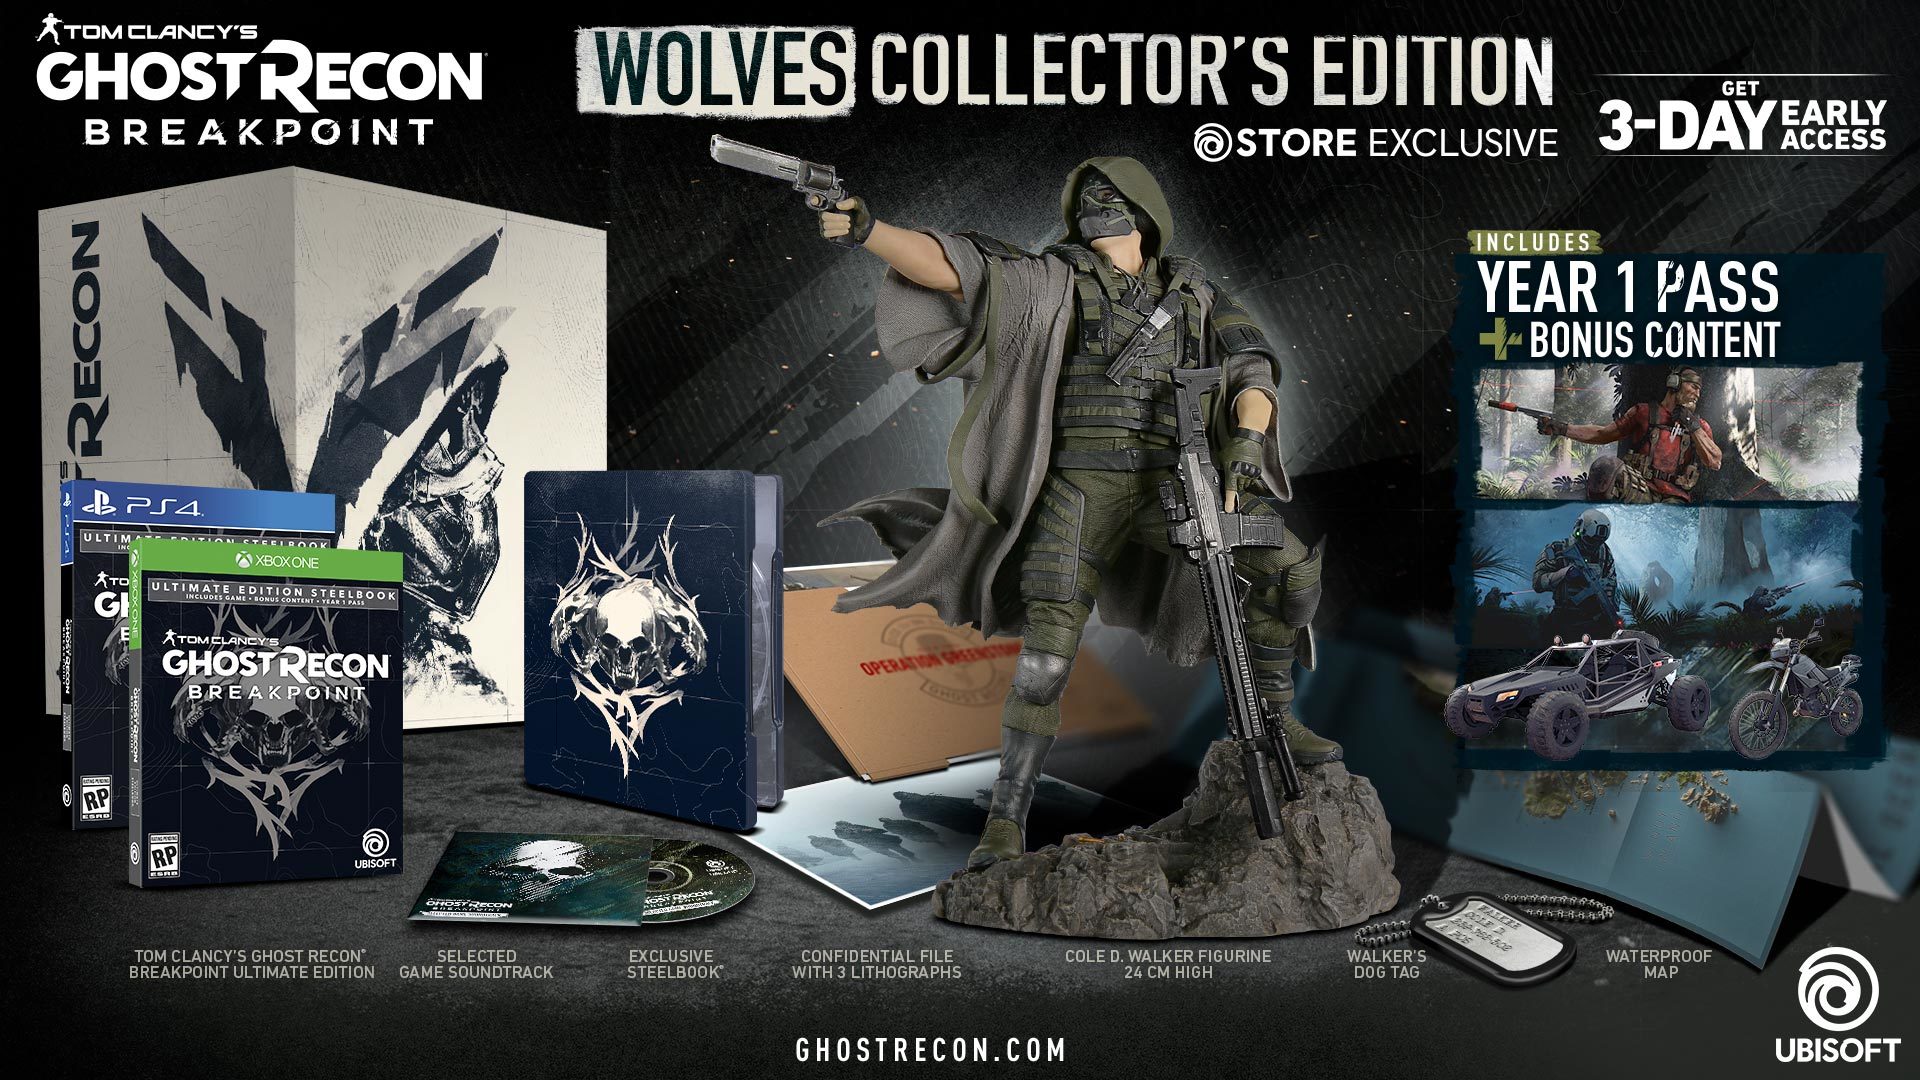 Tom Clancy's Ghost Recon: Breakpoint - Wolves Collector's Edition (PC), Ubisoft